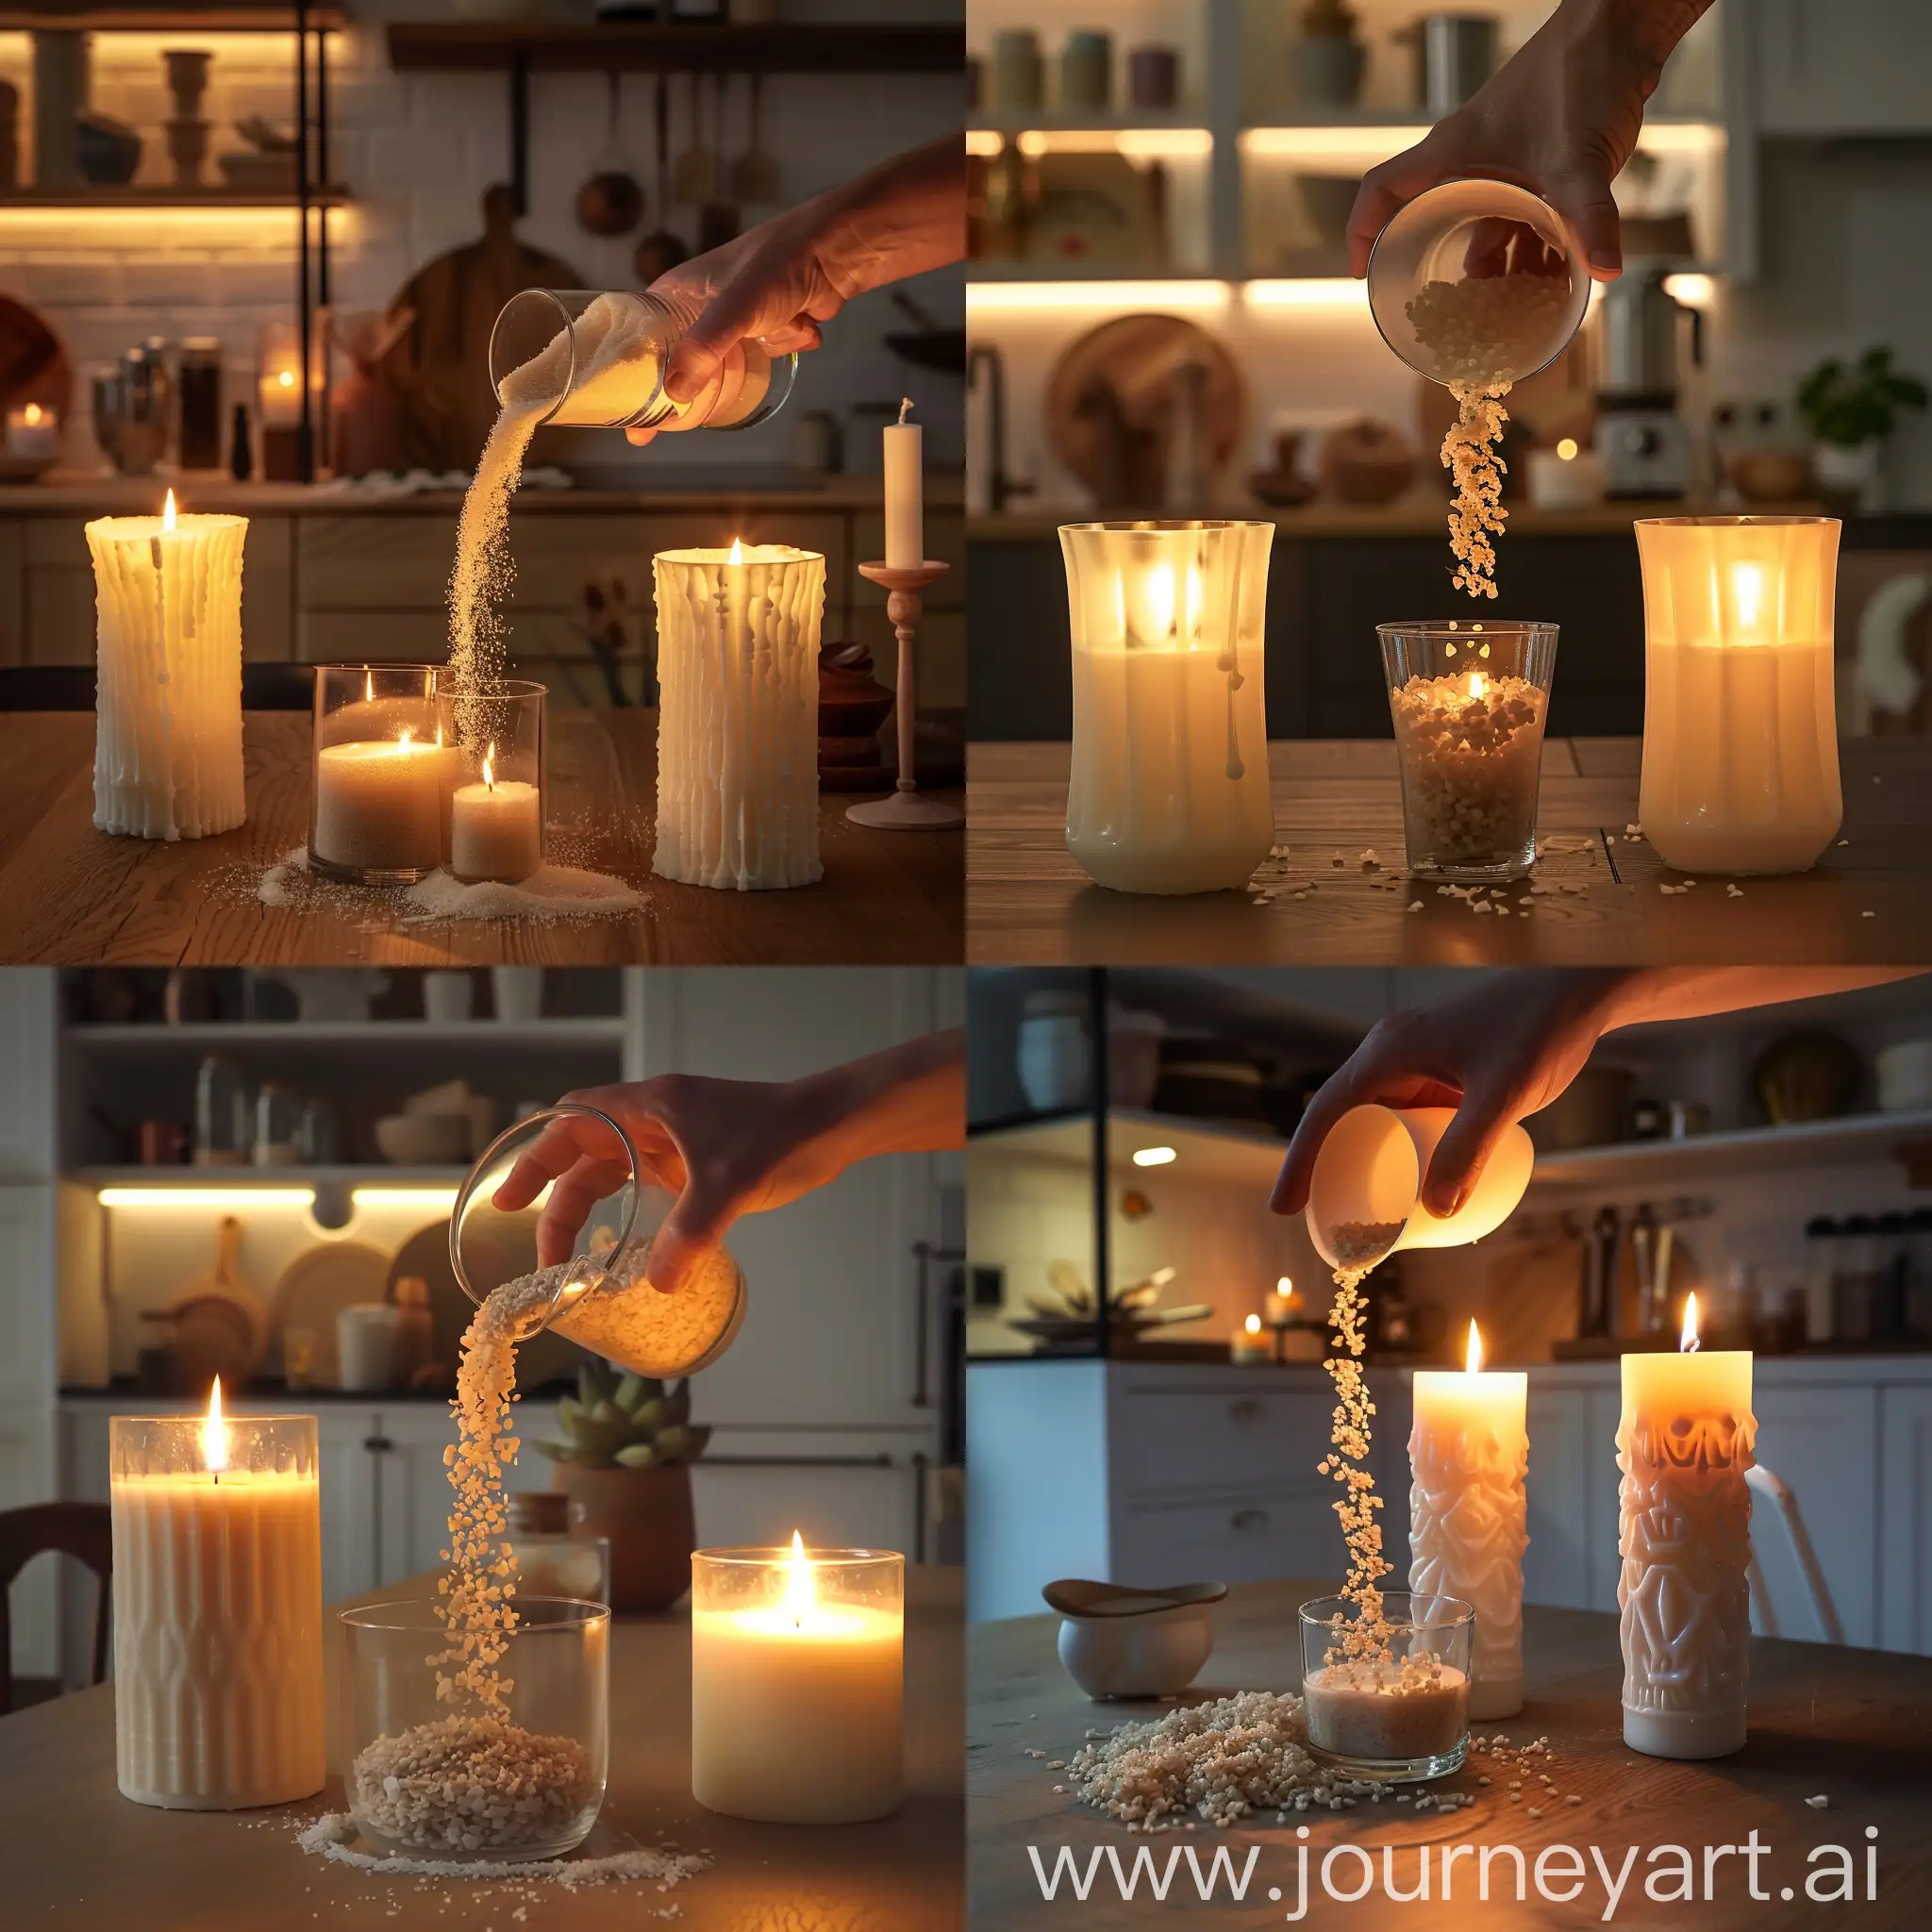 A hand pouring granules of bulk wax into an empty glass from under a candle on the table, while two lighted candles of different sizes and heights of white bulk wax, placed side by side, emit a warm light. The setting resembles a kitchen or dining area with shelves in the background, where various decorative items and kitchen utensils are stored.